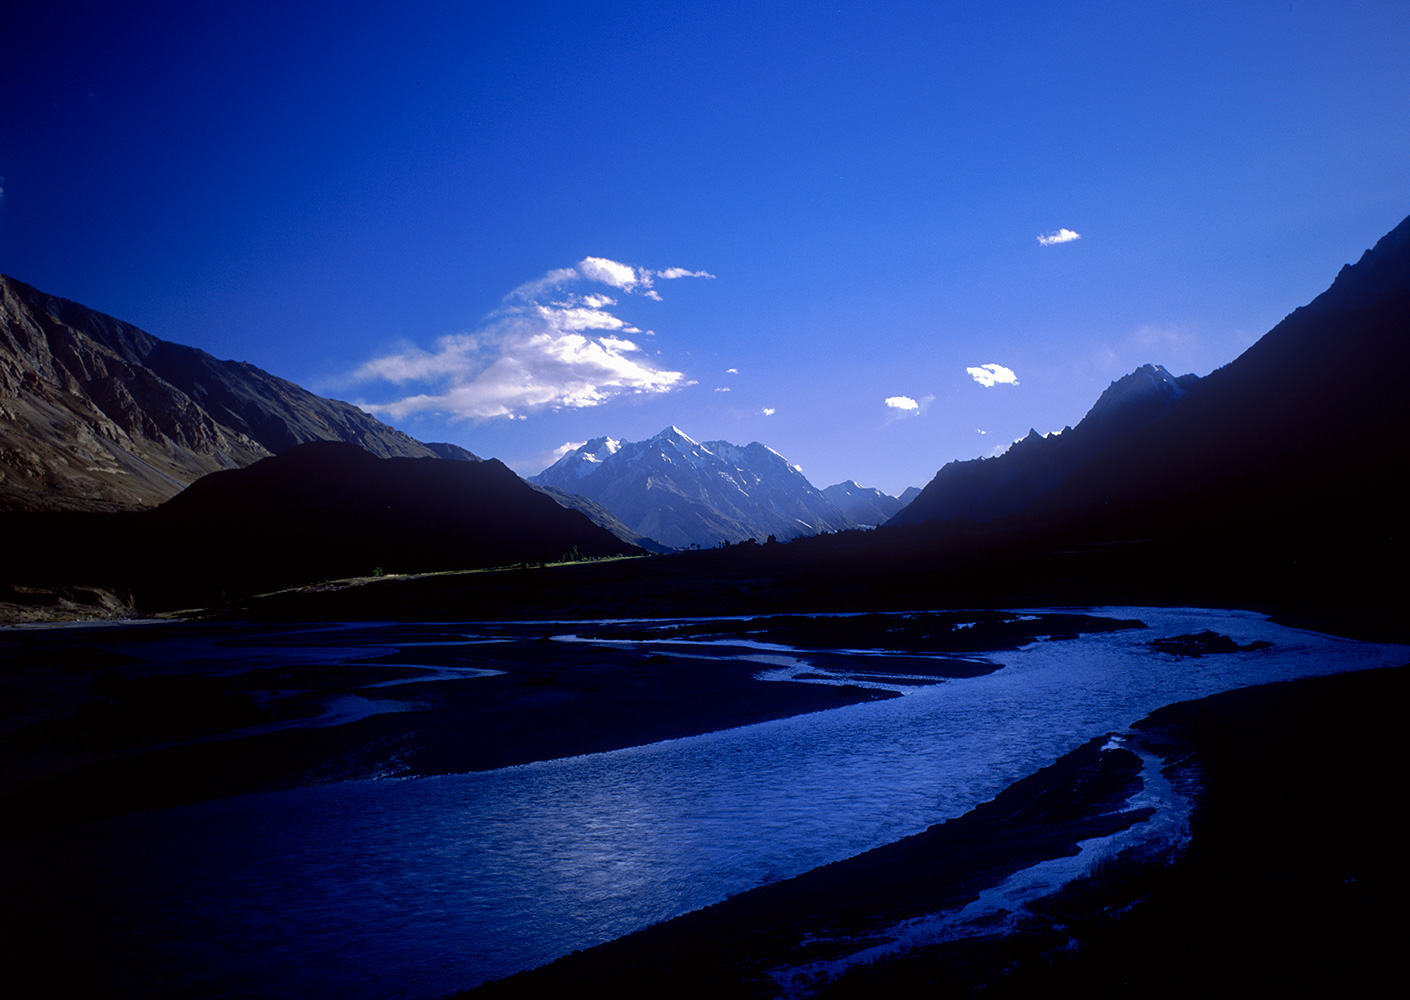 Leaving the village of Lasht early in the morning to beat the sun and rising river levels, this image captures the delicious atmosphere of these valleys before the scorching heat of the sun turns them into furnaces.Bronica ETRSi, Fuji Velvia